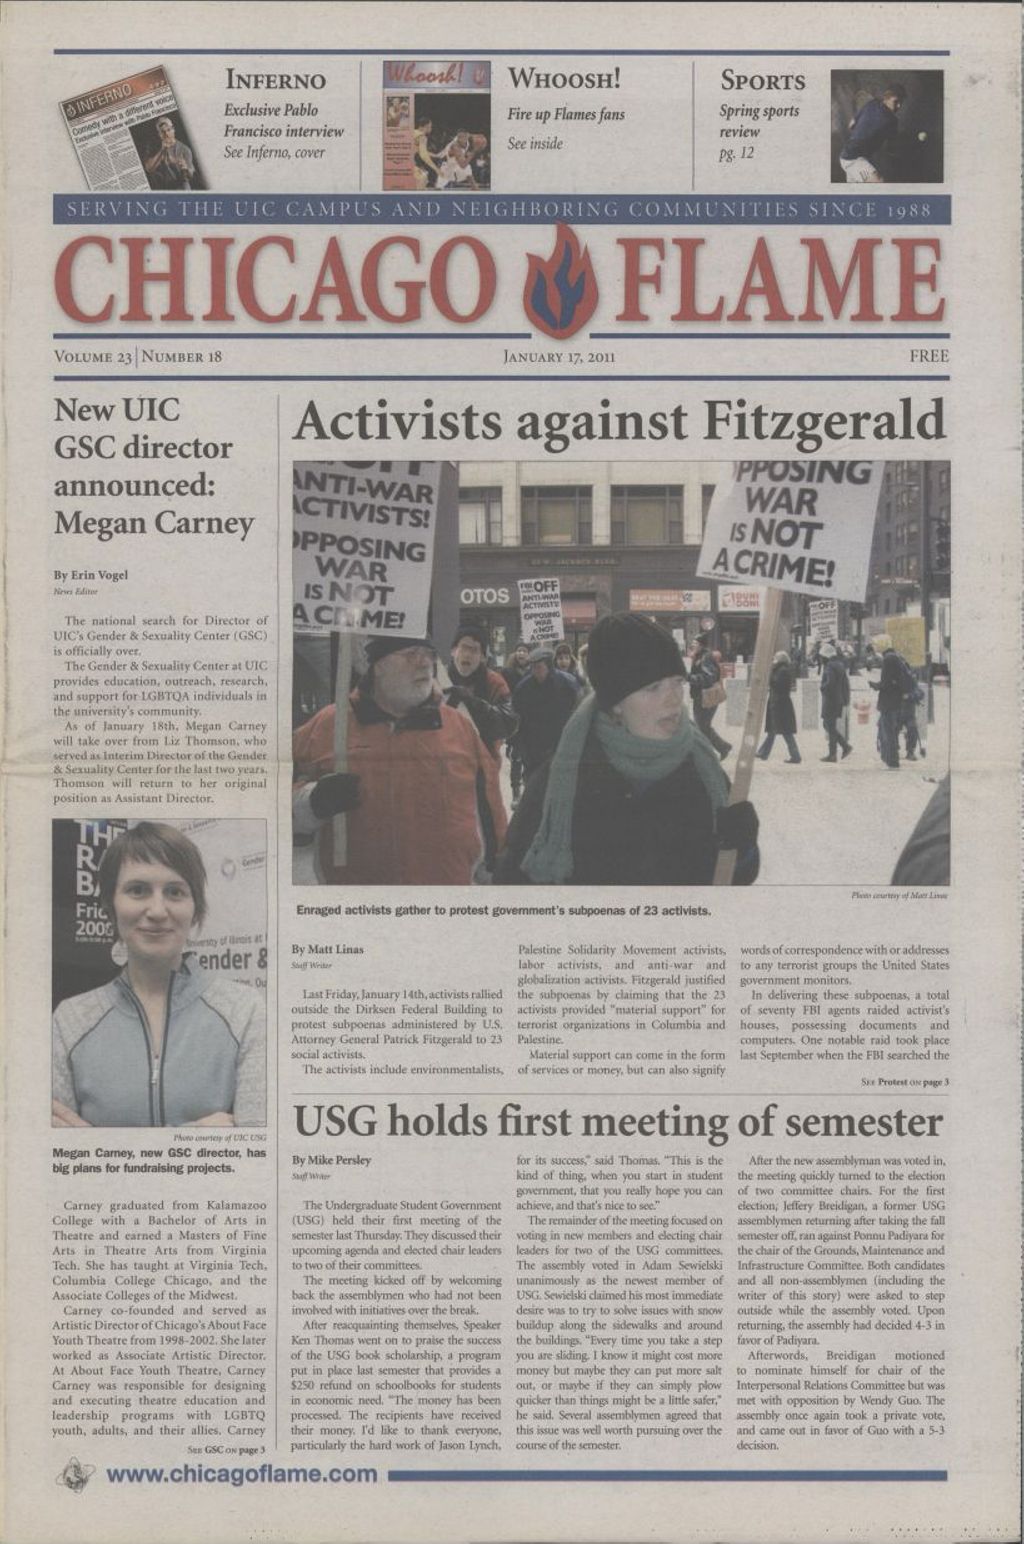 Miniature of Chicago Flame (January 17, 2011)